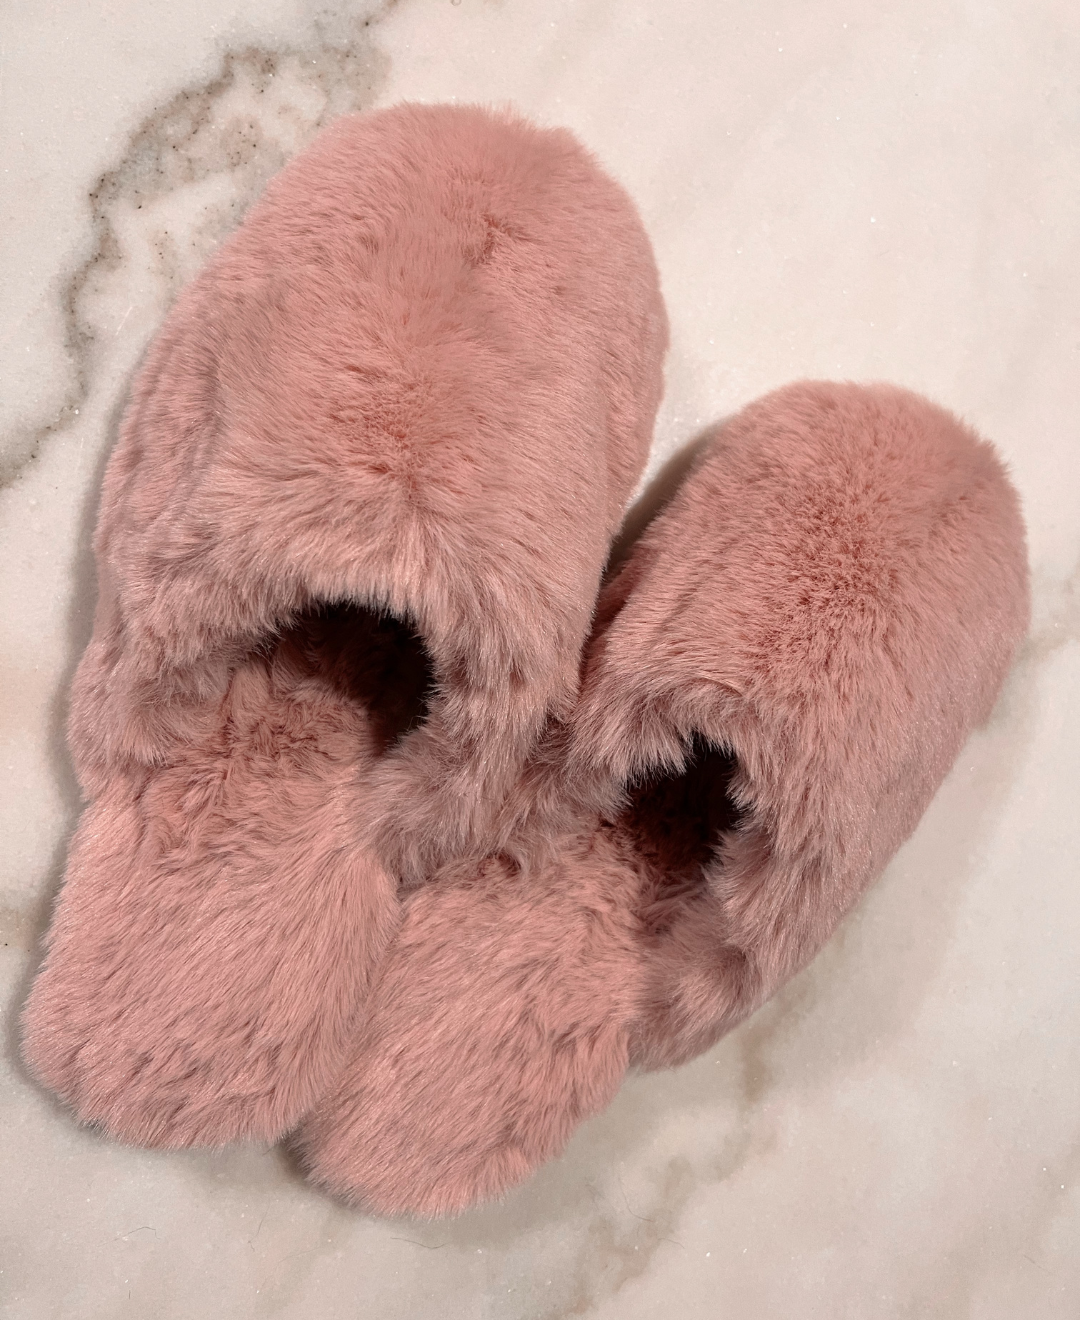 10 Arch Support Slippers Recommended by Podiatrists in 2024